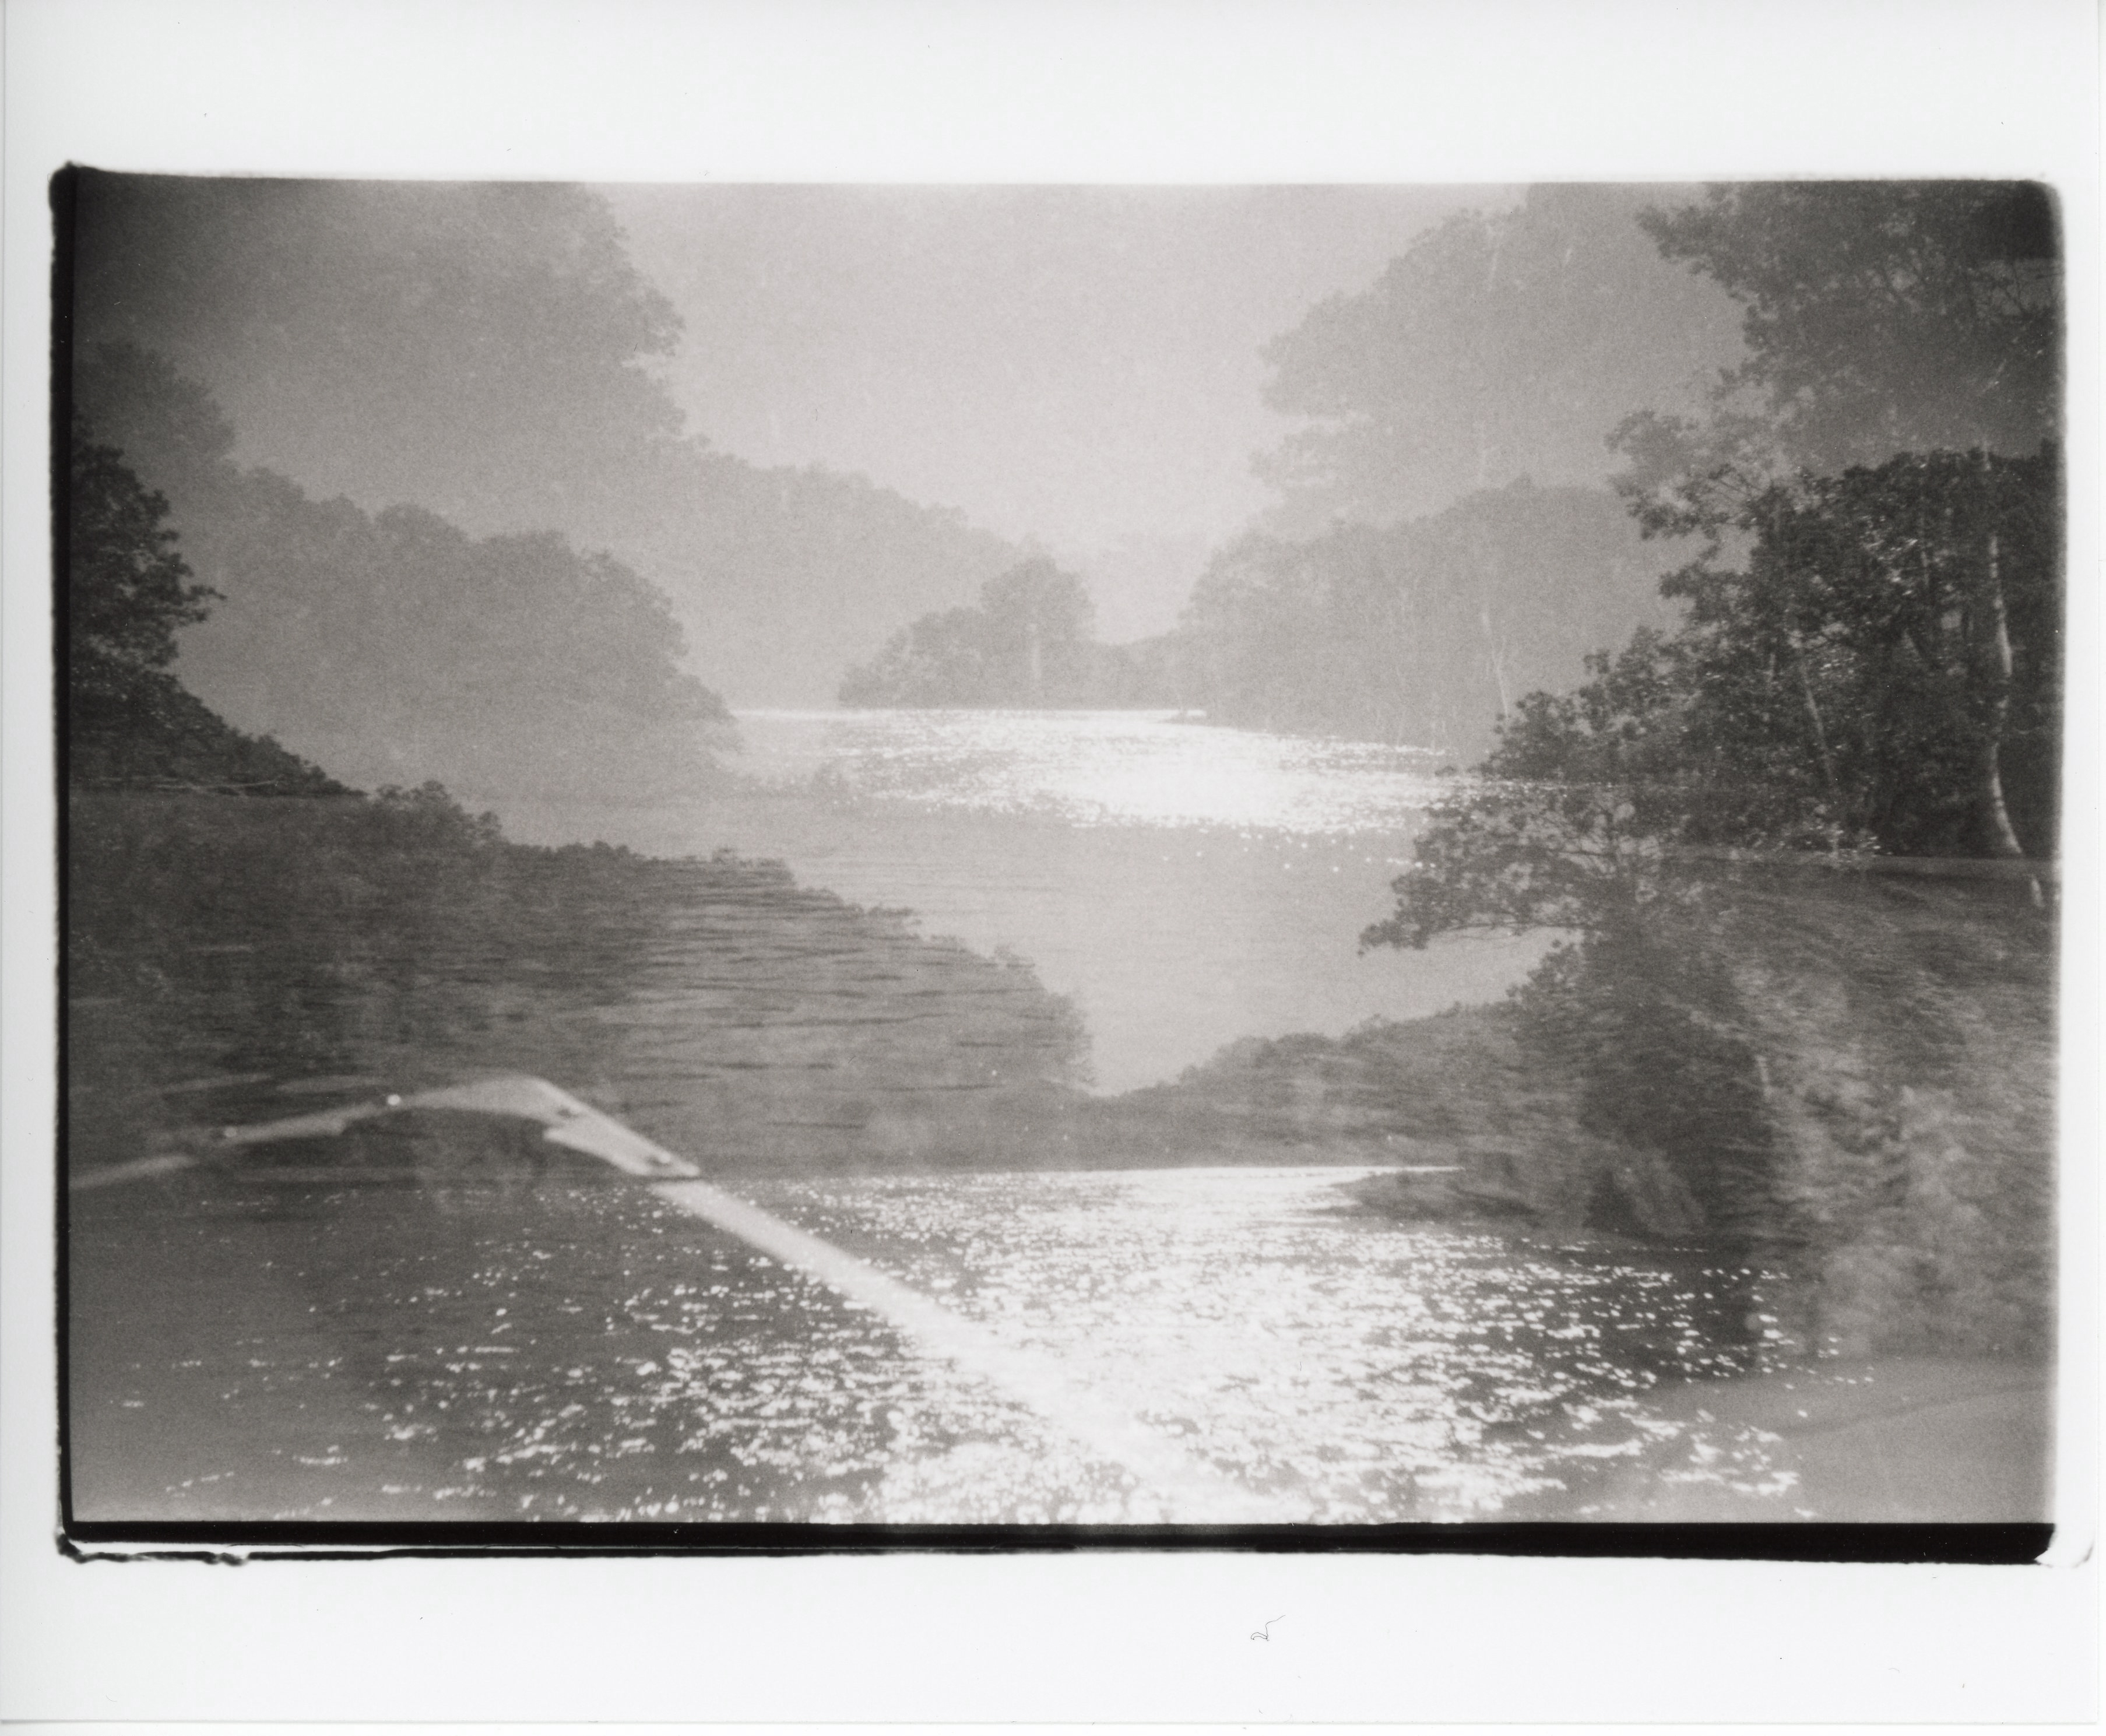 a black and white, sepia toned, 35mm print with messy edges; three similar images looking down a river from a boat are exposed, with the camera shifting vertically between exposures; the bow of the boat is visible in the bottom left corner, only in one of the exposures. there are trees in the distance and trees on either side; the sun is shining on the water